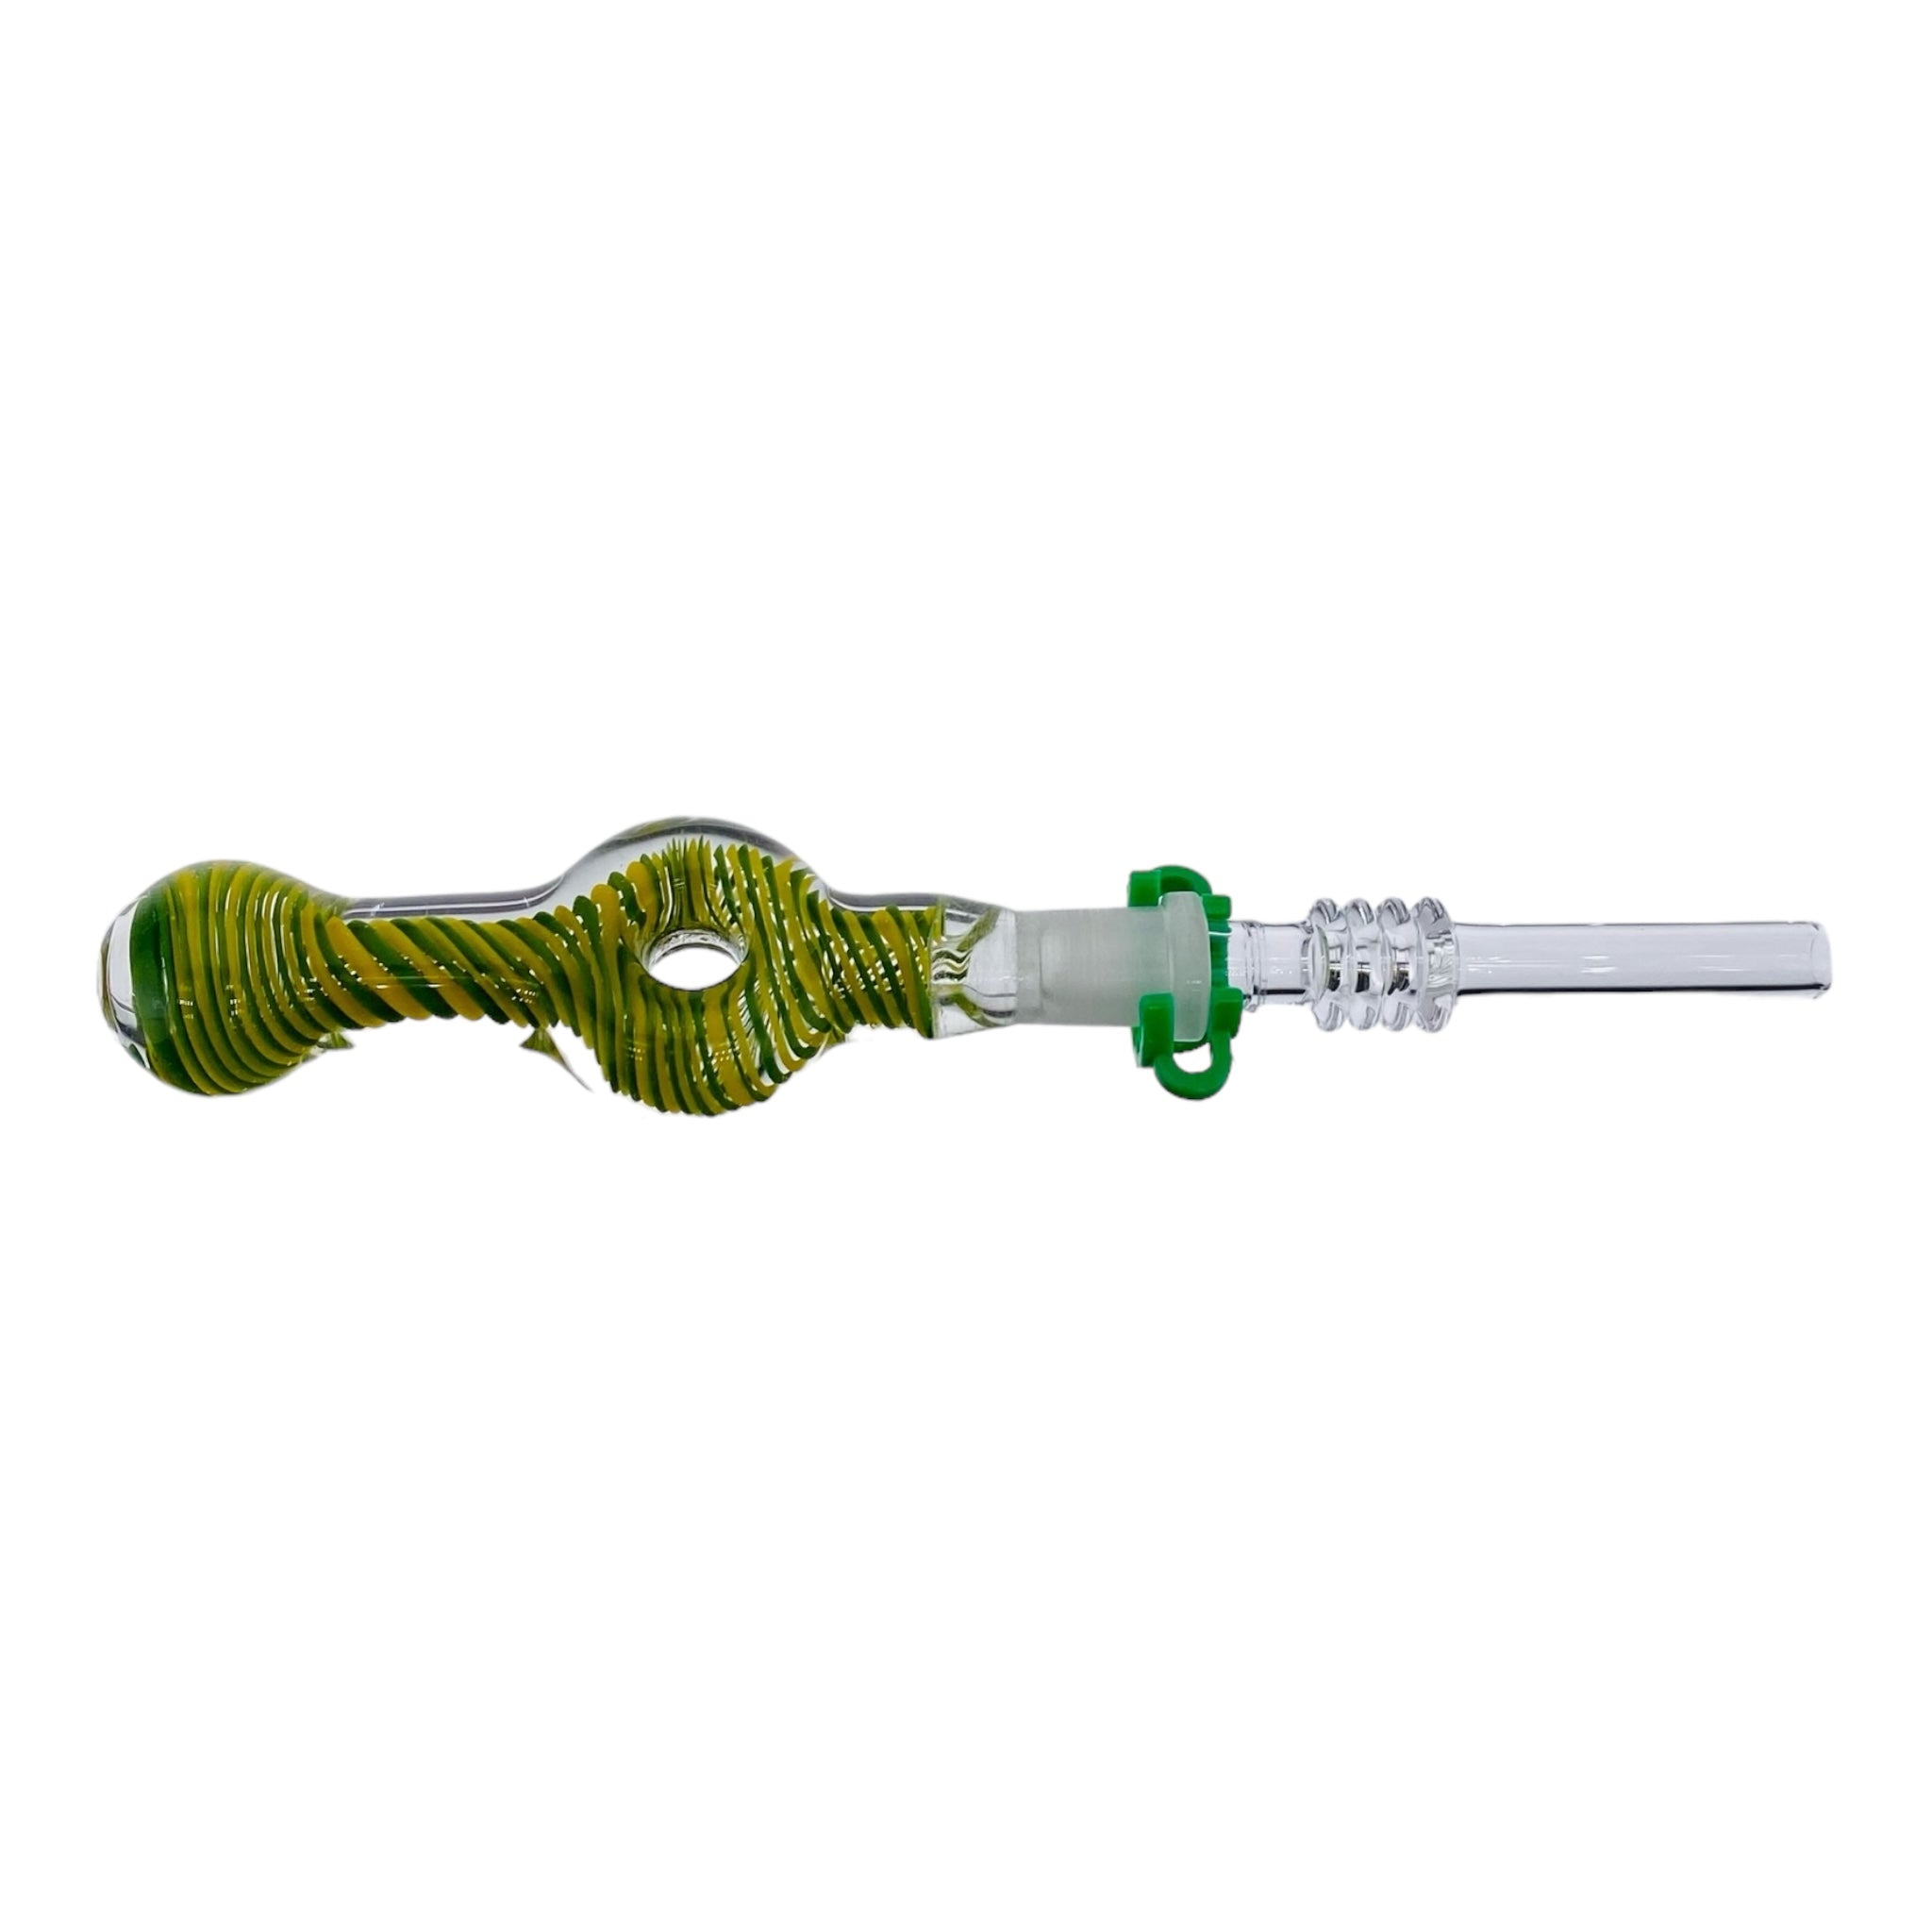 10mm Nectar Collector - Green And Yellow Inside Out Spiral Donut With Quartz Tip